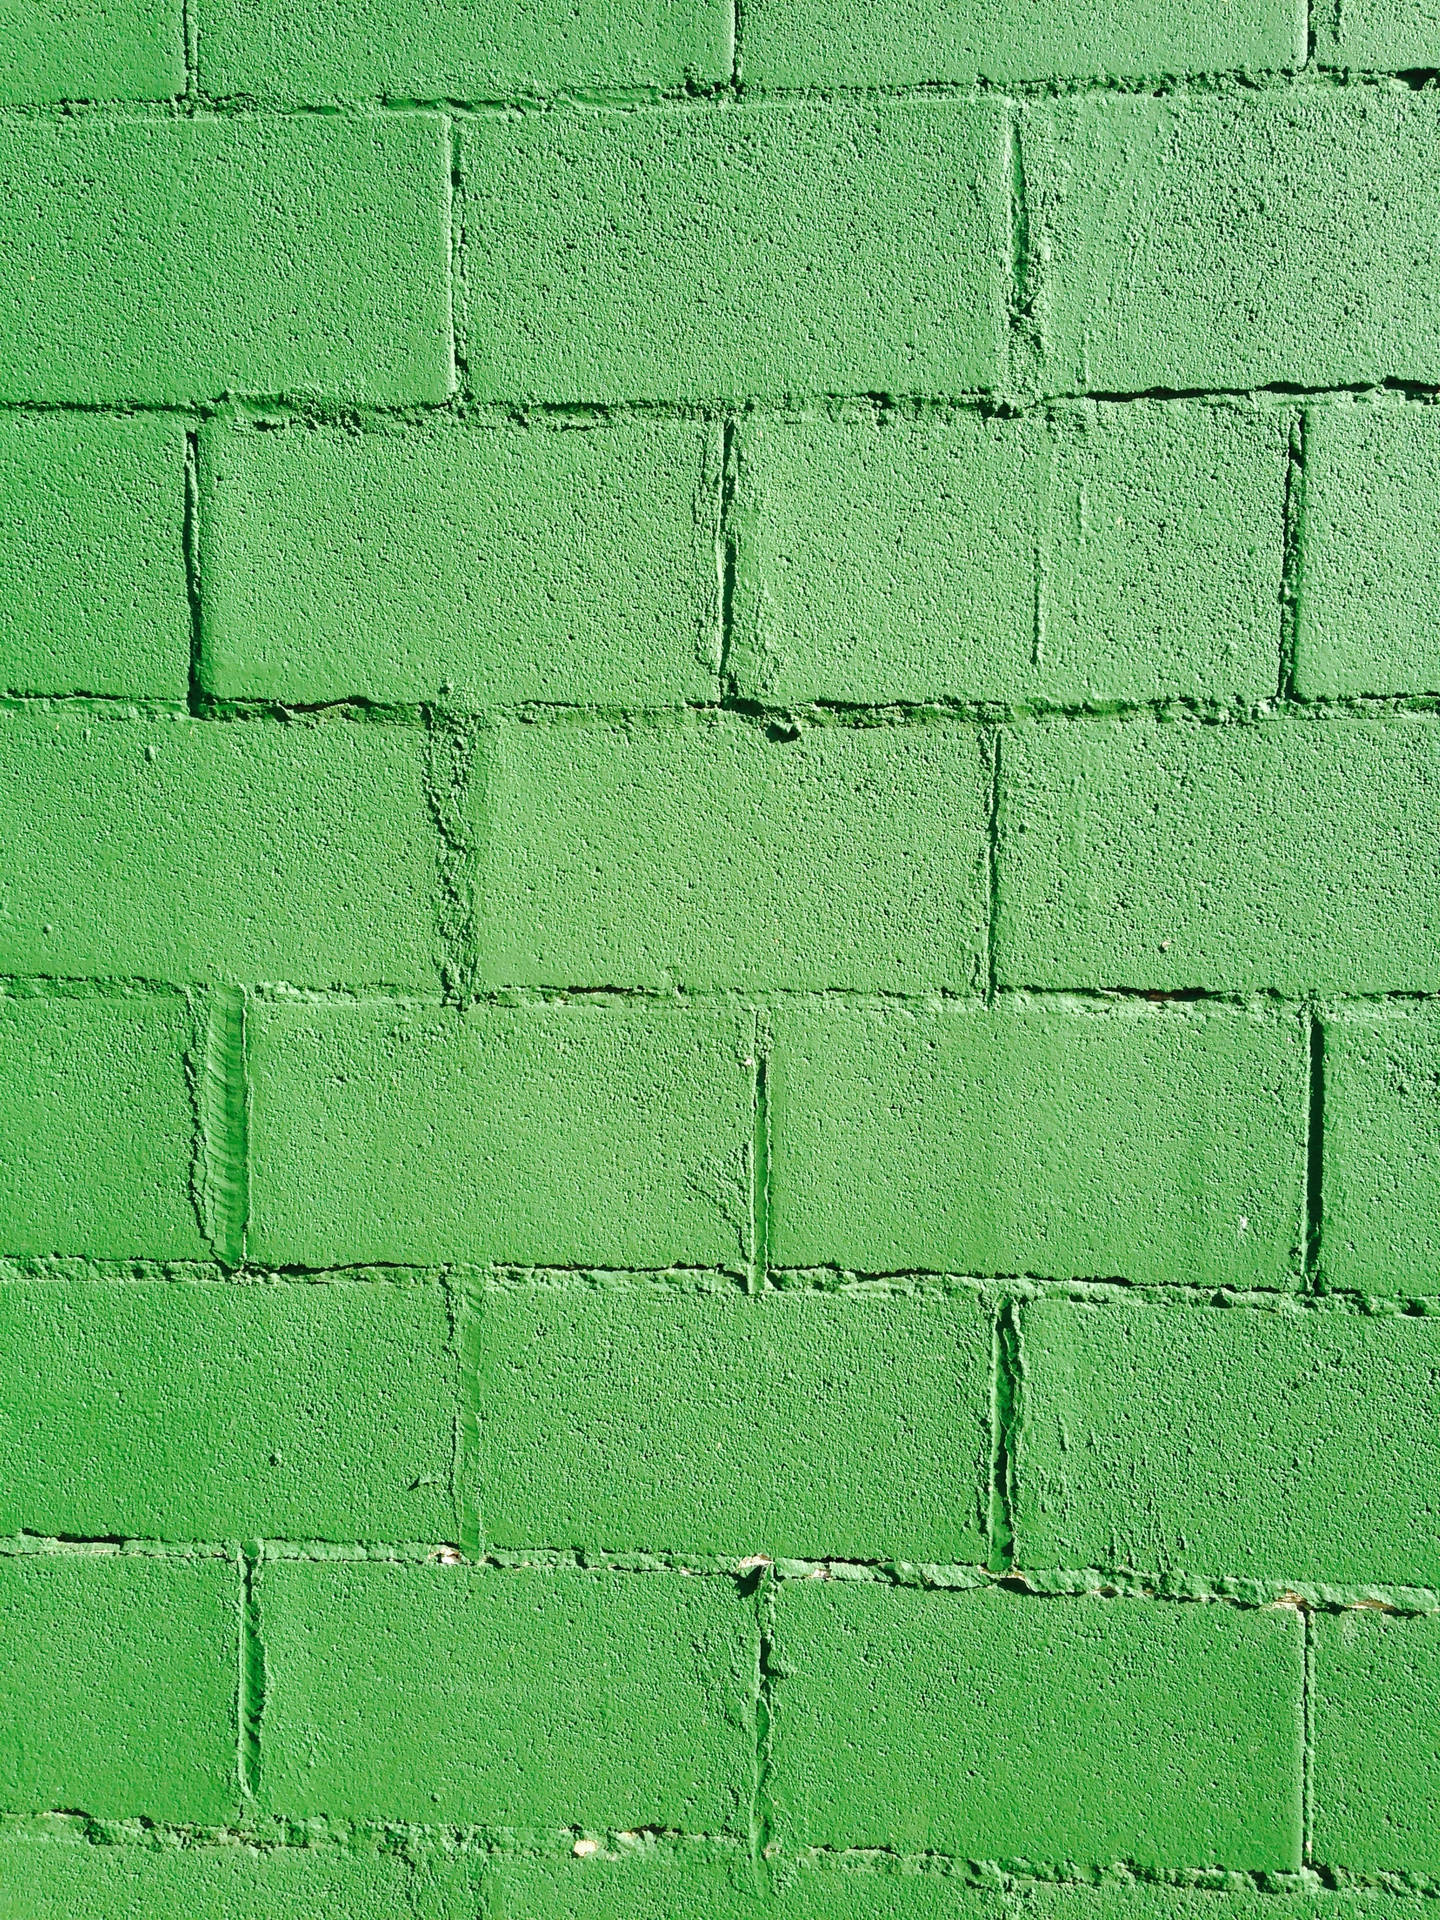 2448X3264 Brick Wallpaper and Background